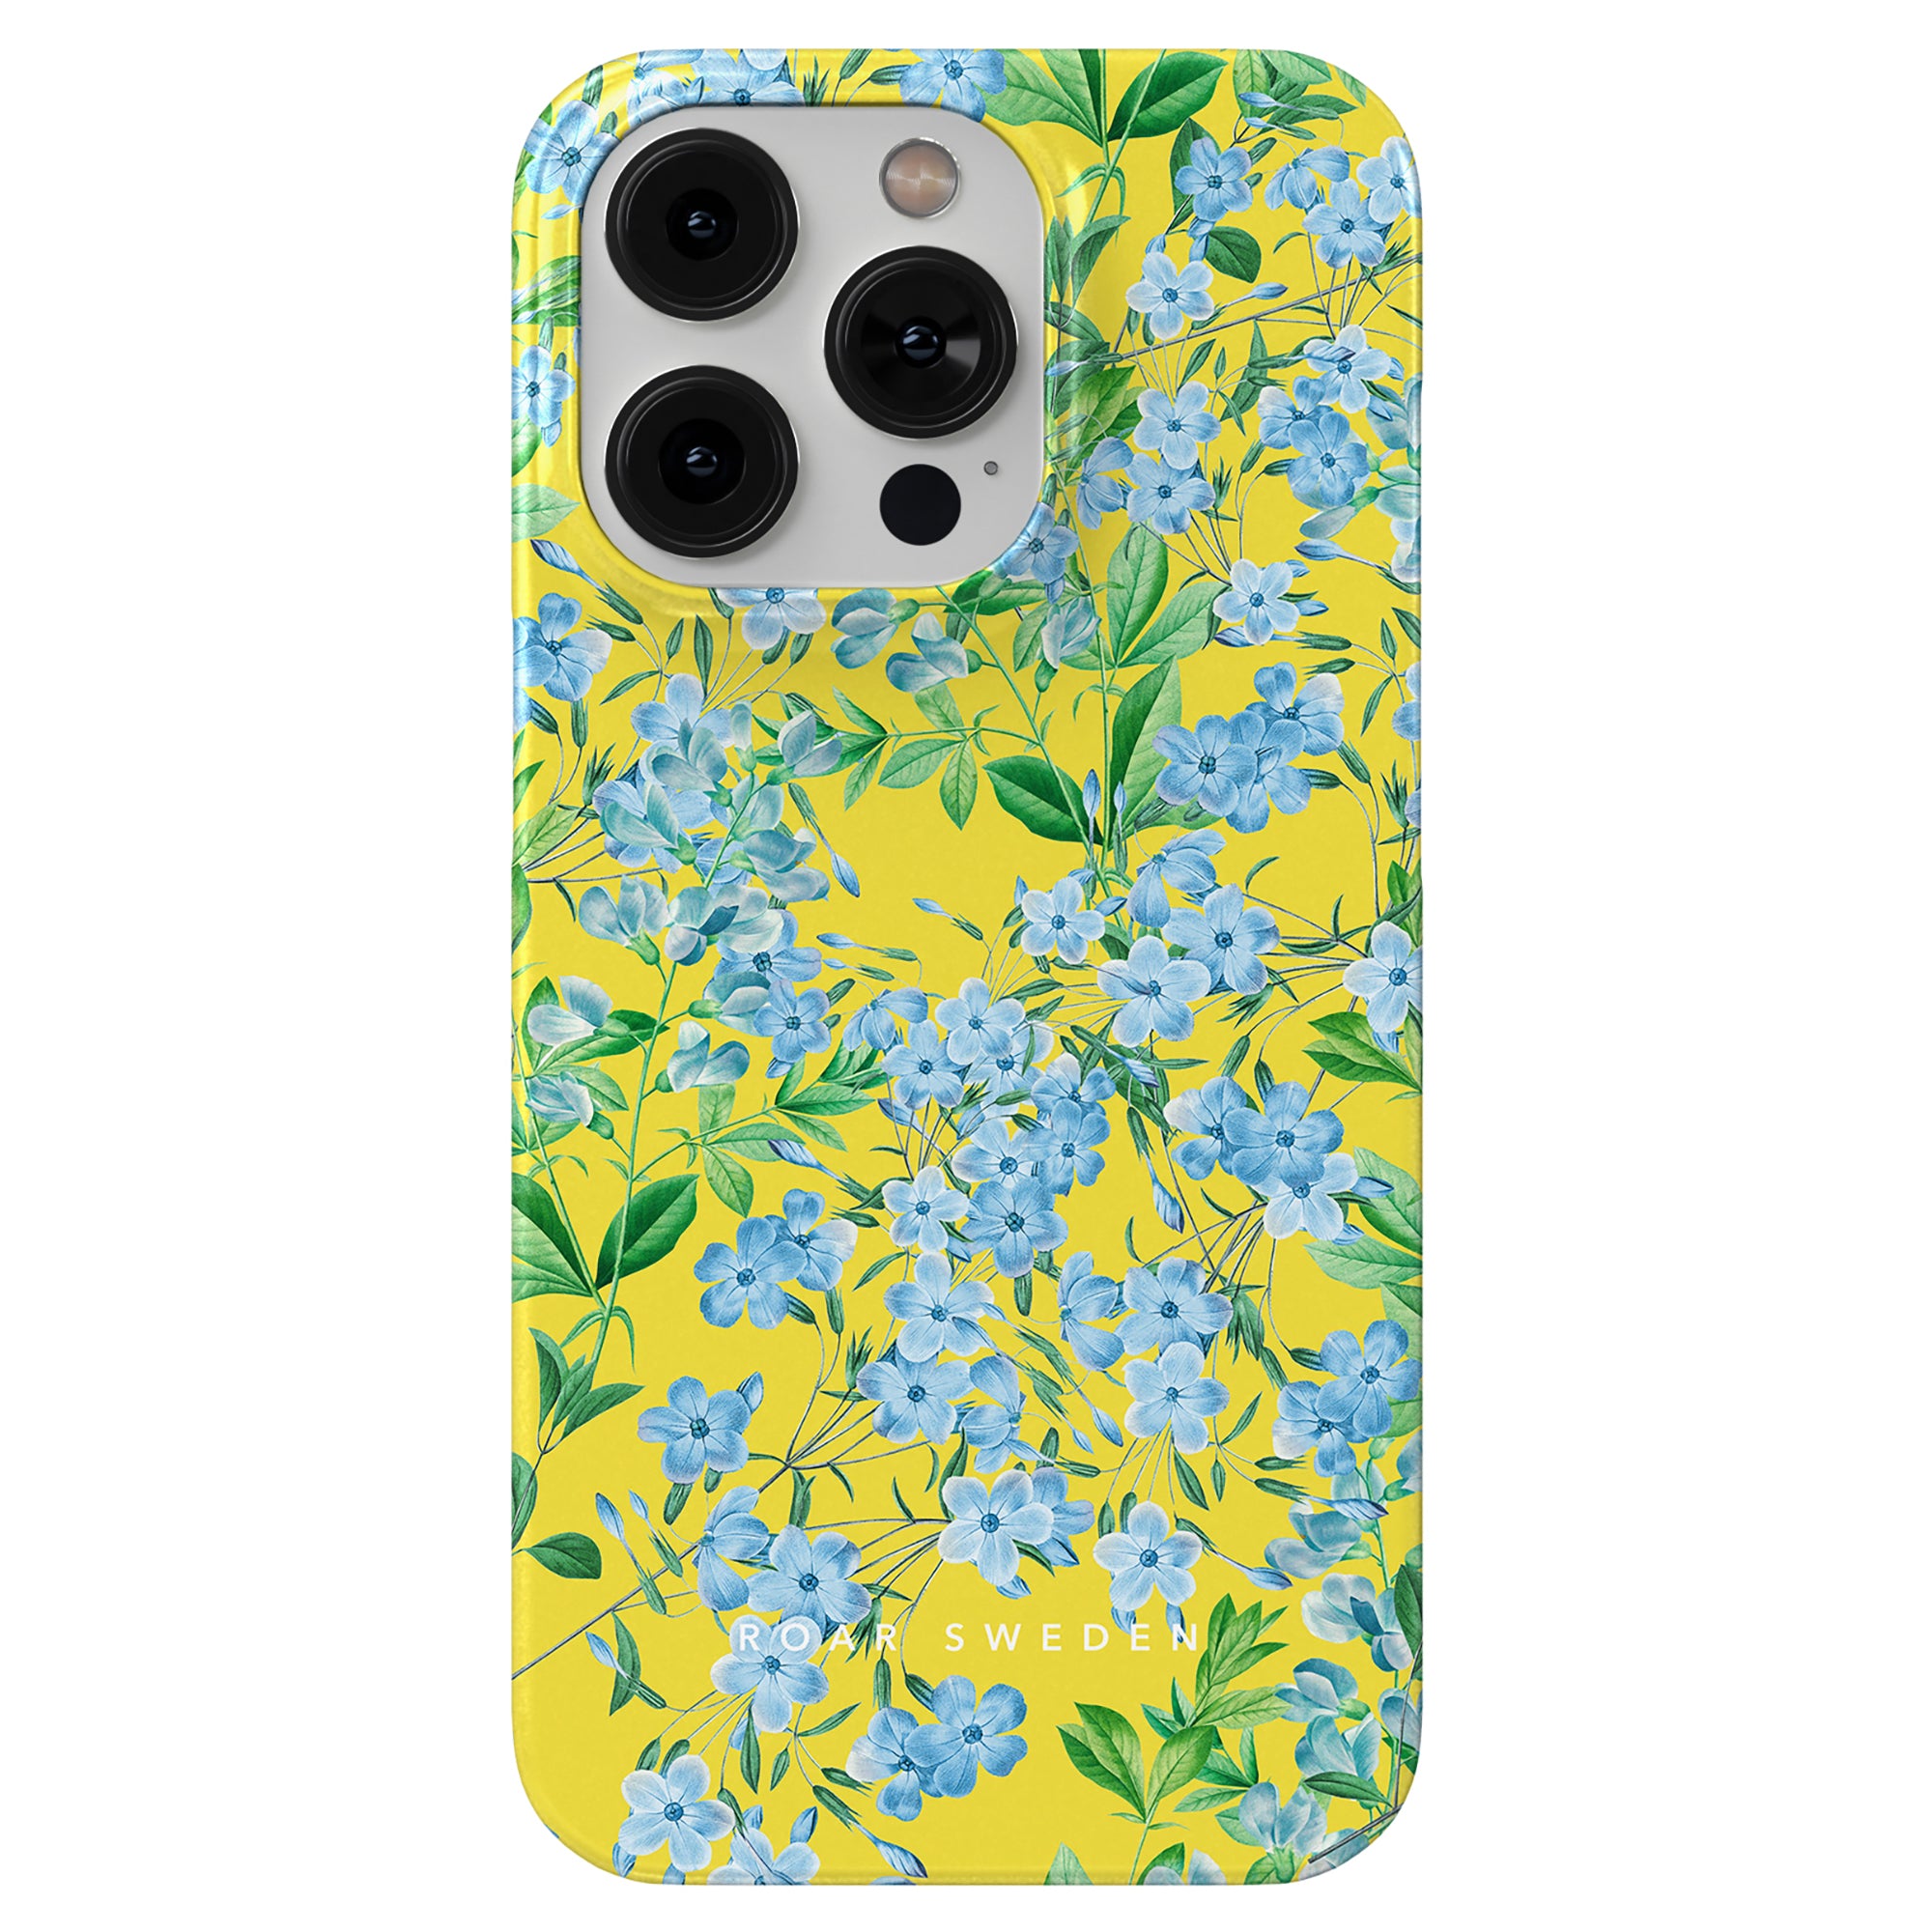 Product description: Spring Ditsy - Slim case featuring a patterned smartphone case with a floral design on a yellow background.